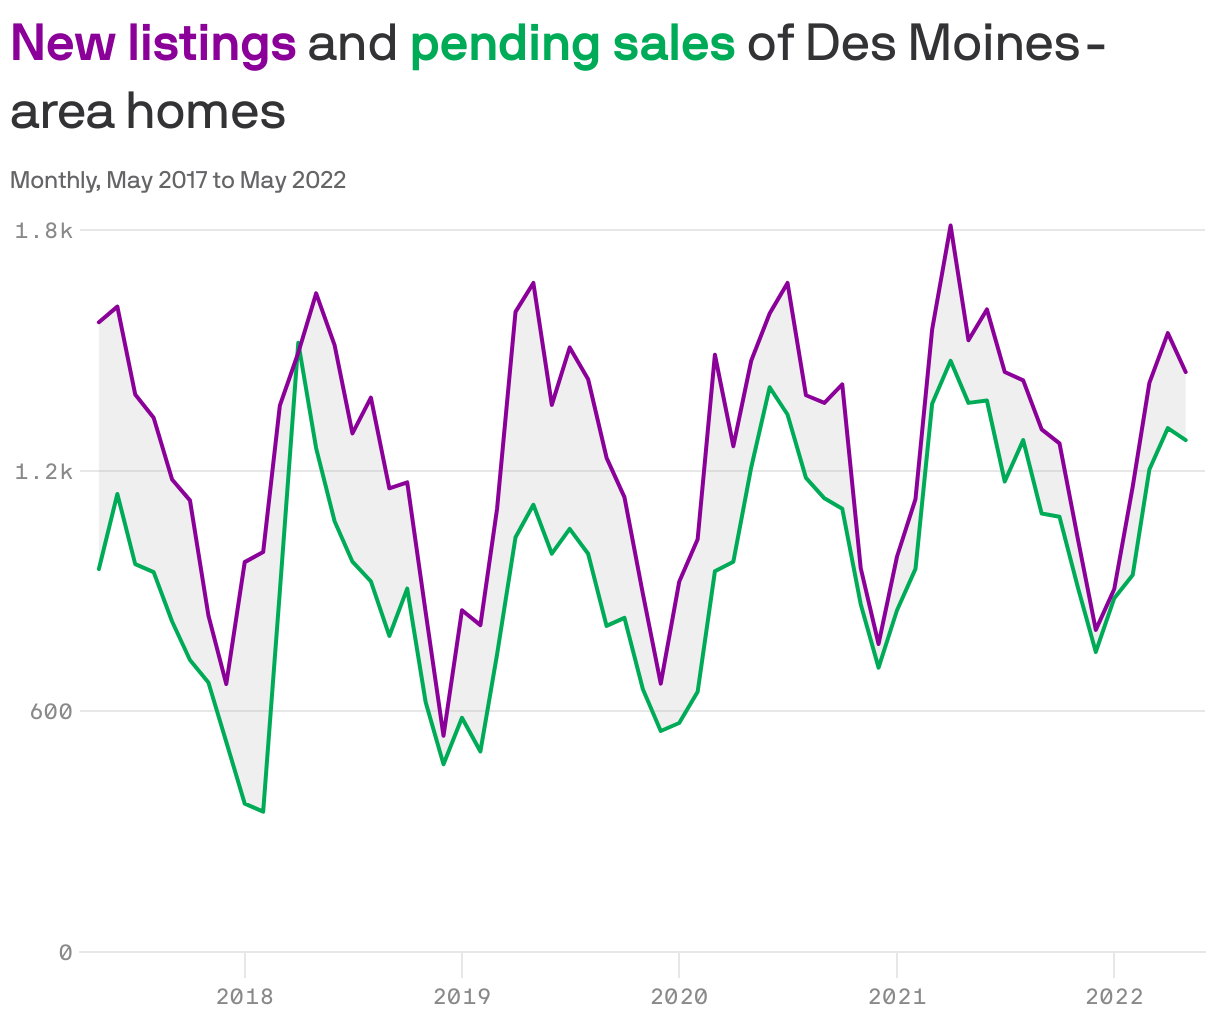 <b style='color: #8a0098'>New listings</b> and <b style='color: #00ab58'>pending sales</b> of Des Moines-area homes